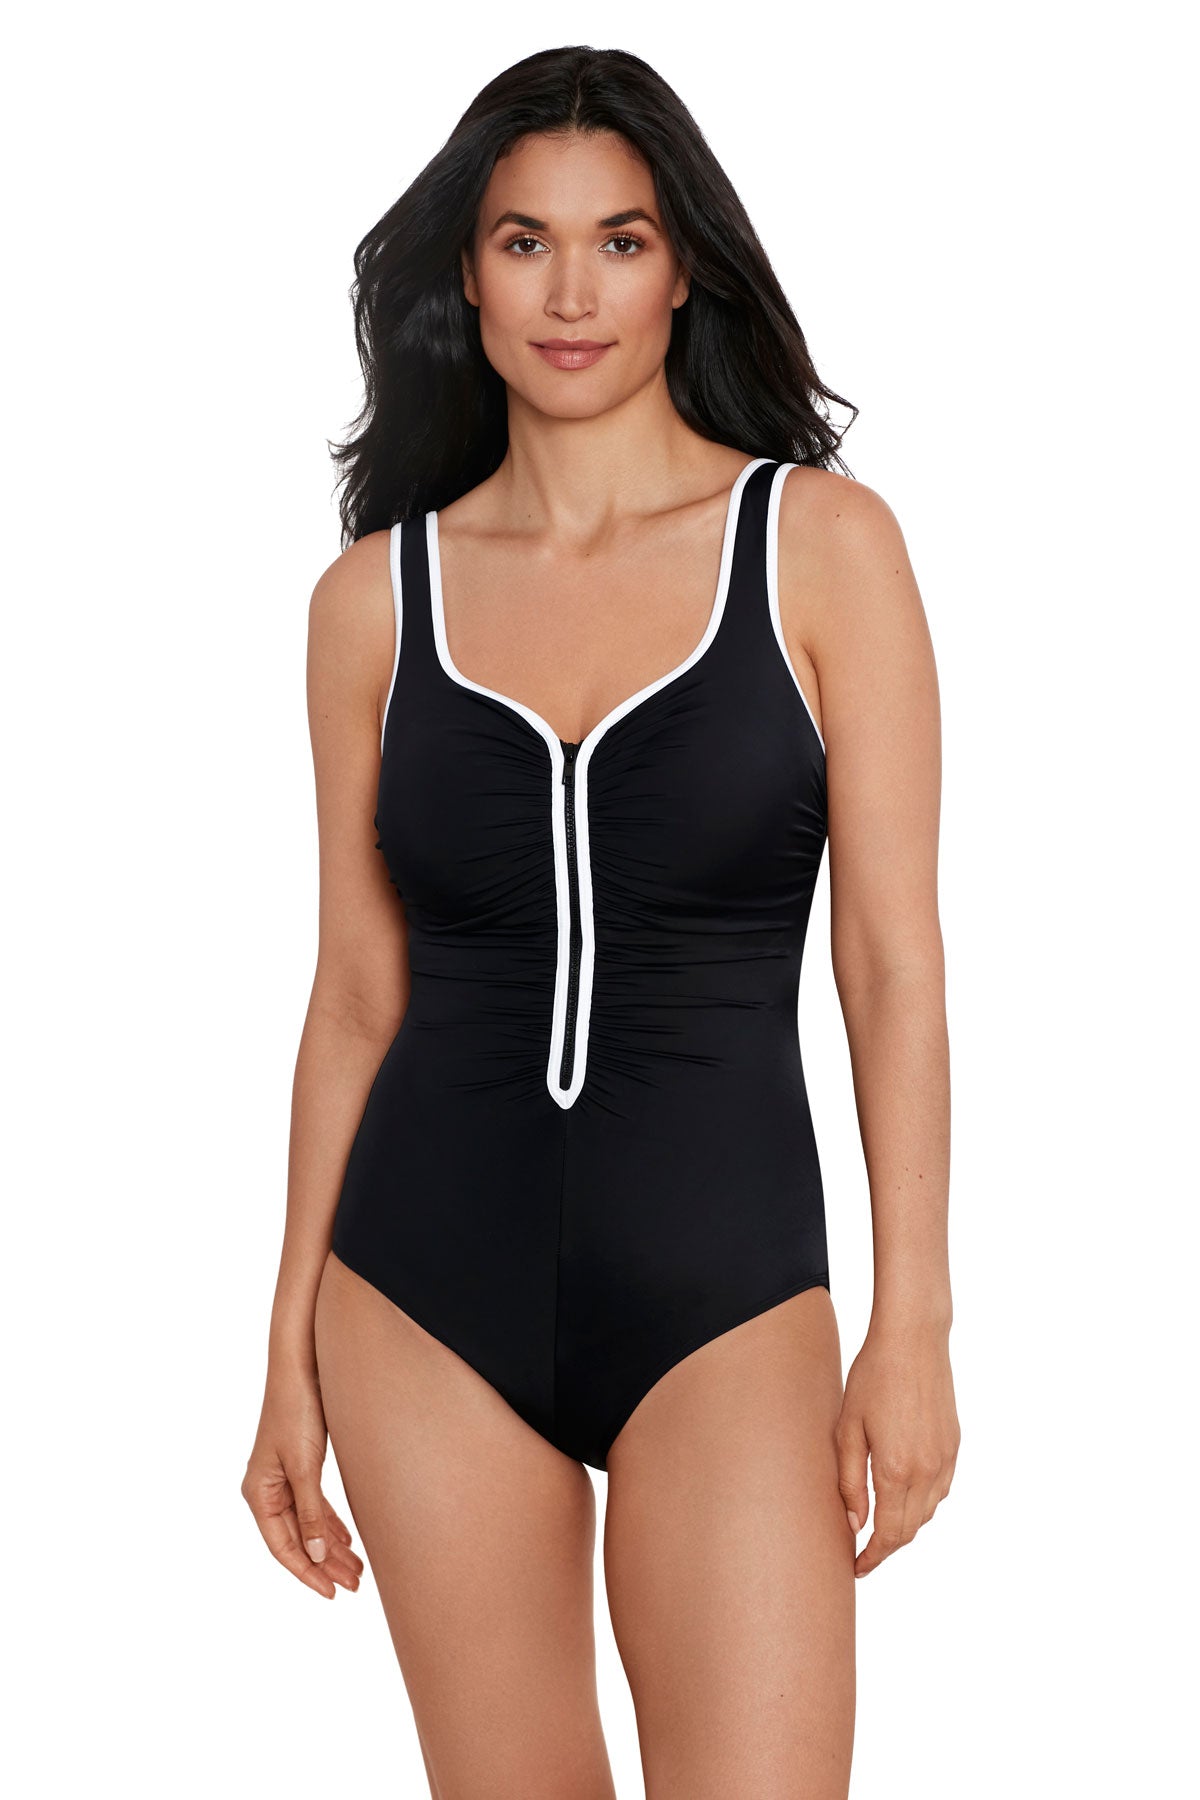 Shapesolver Sport: One Piece Color Coated Zipper Tank Swimsuit - BLACK/WHITE